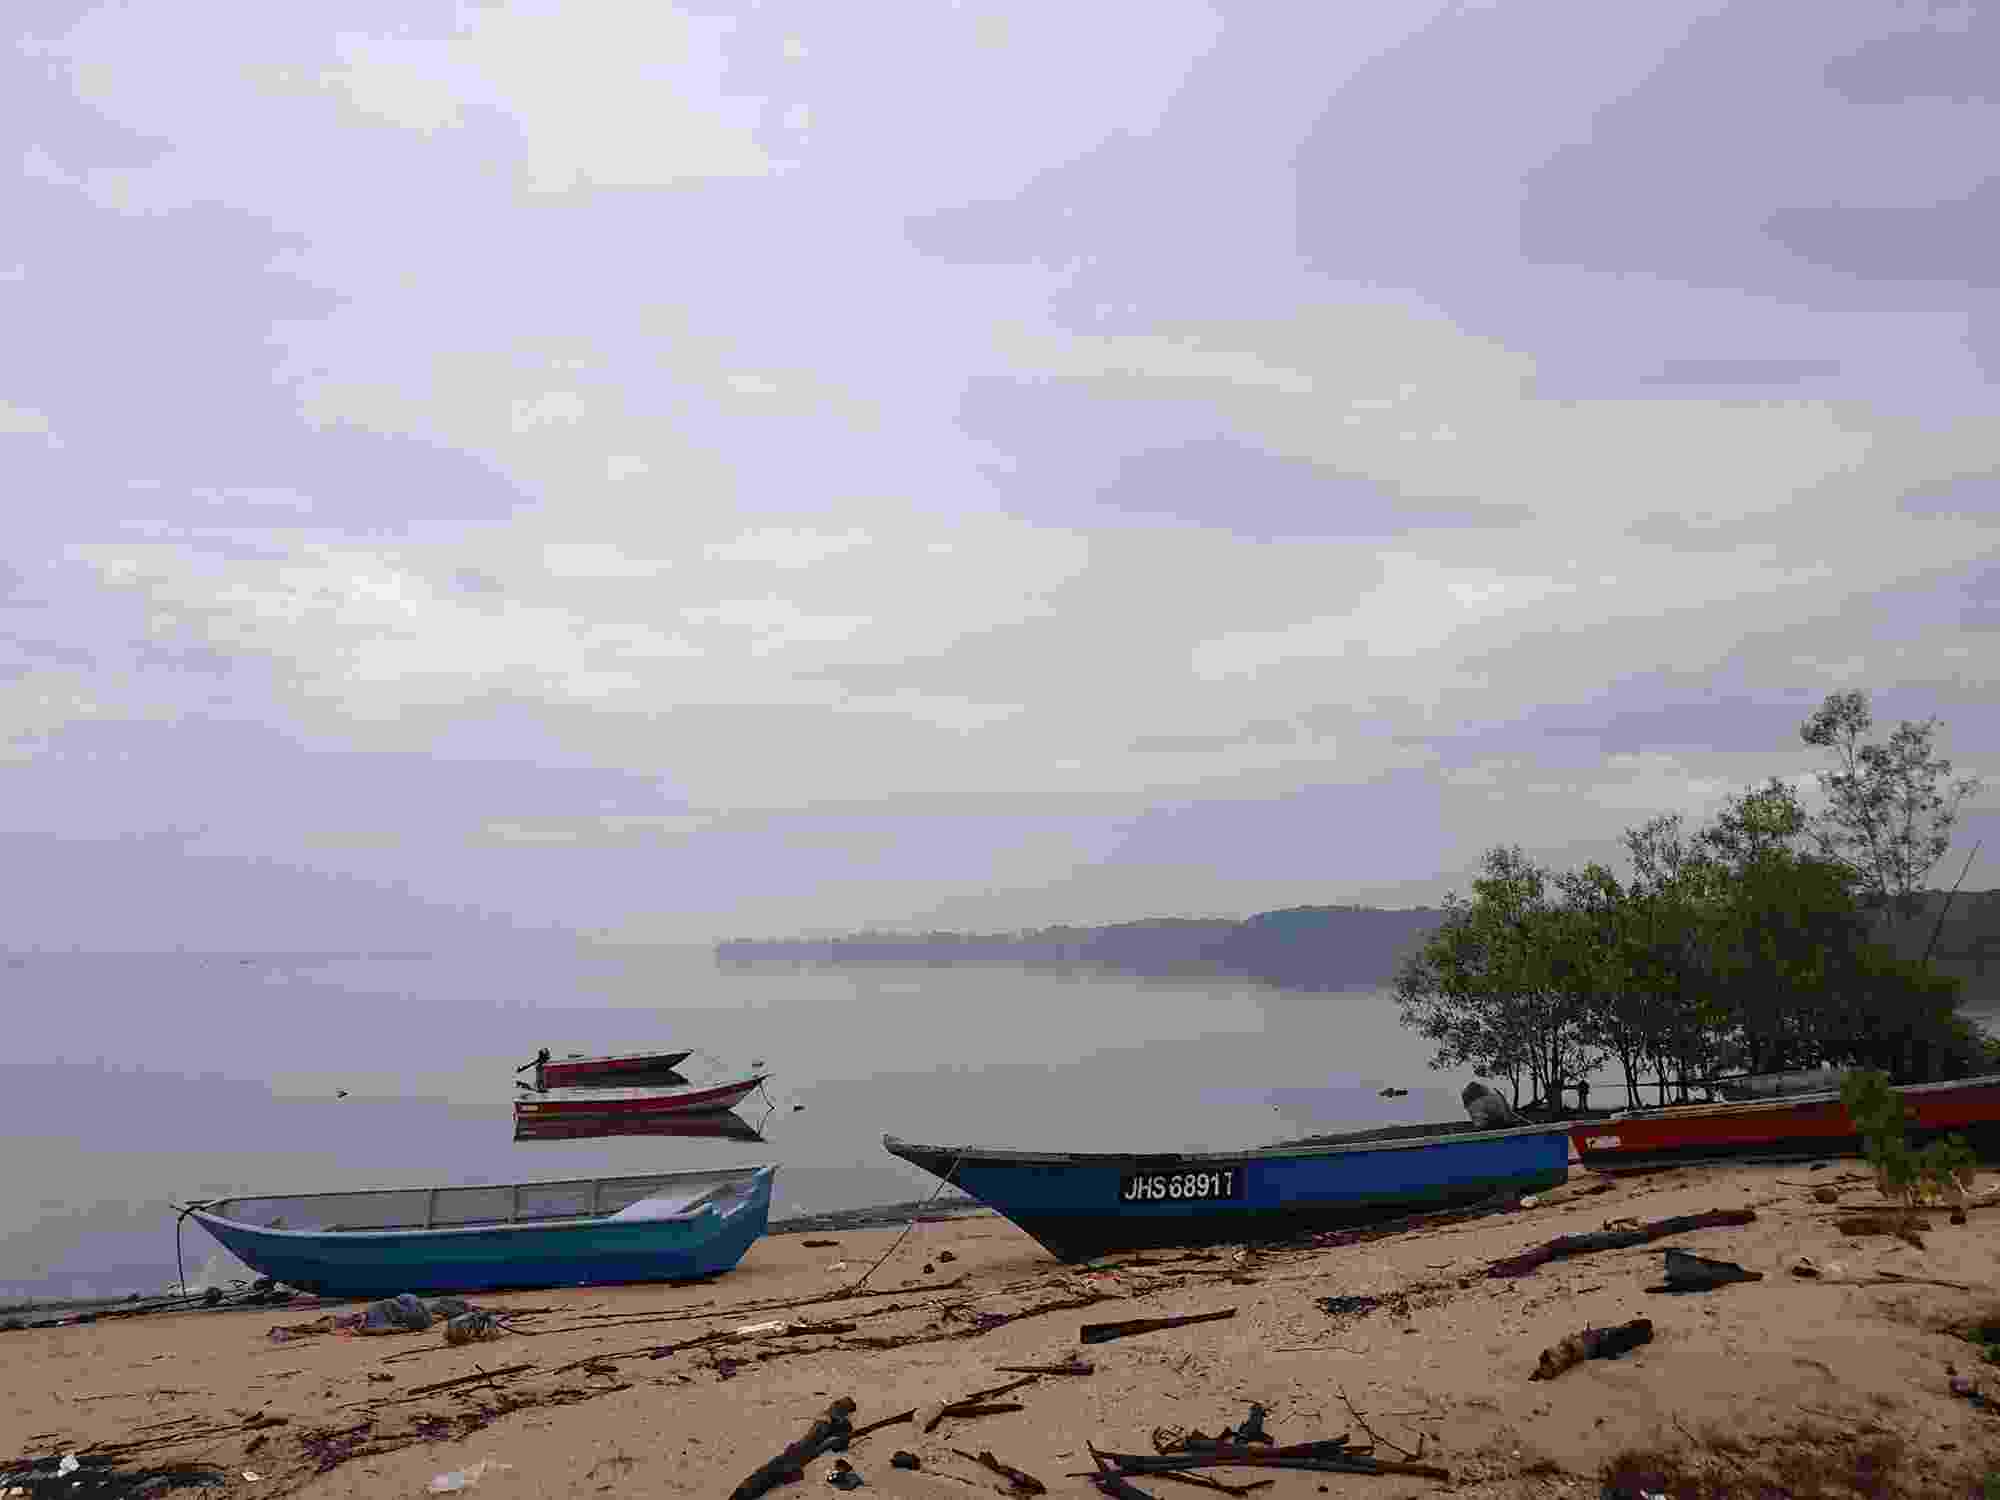 A misty scene on the Johor River in Malaysia, with several boats tethered on the water, and others pulled up onto a sandy bank